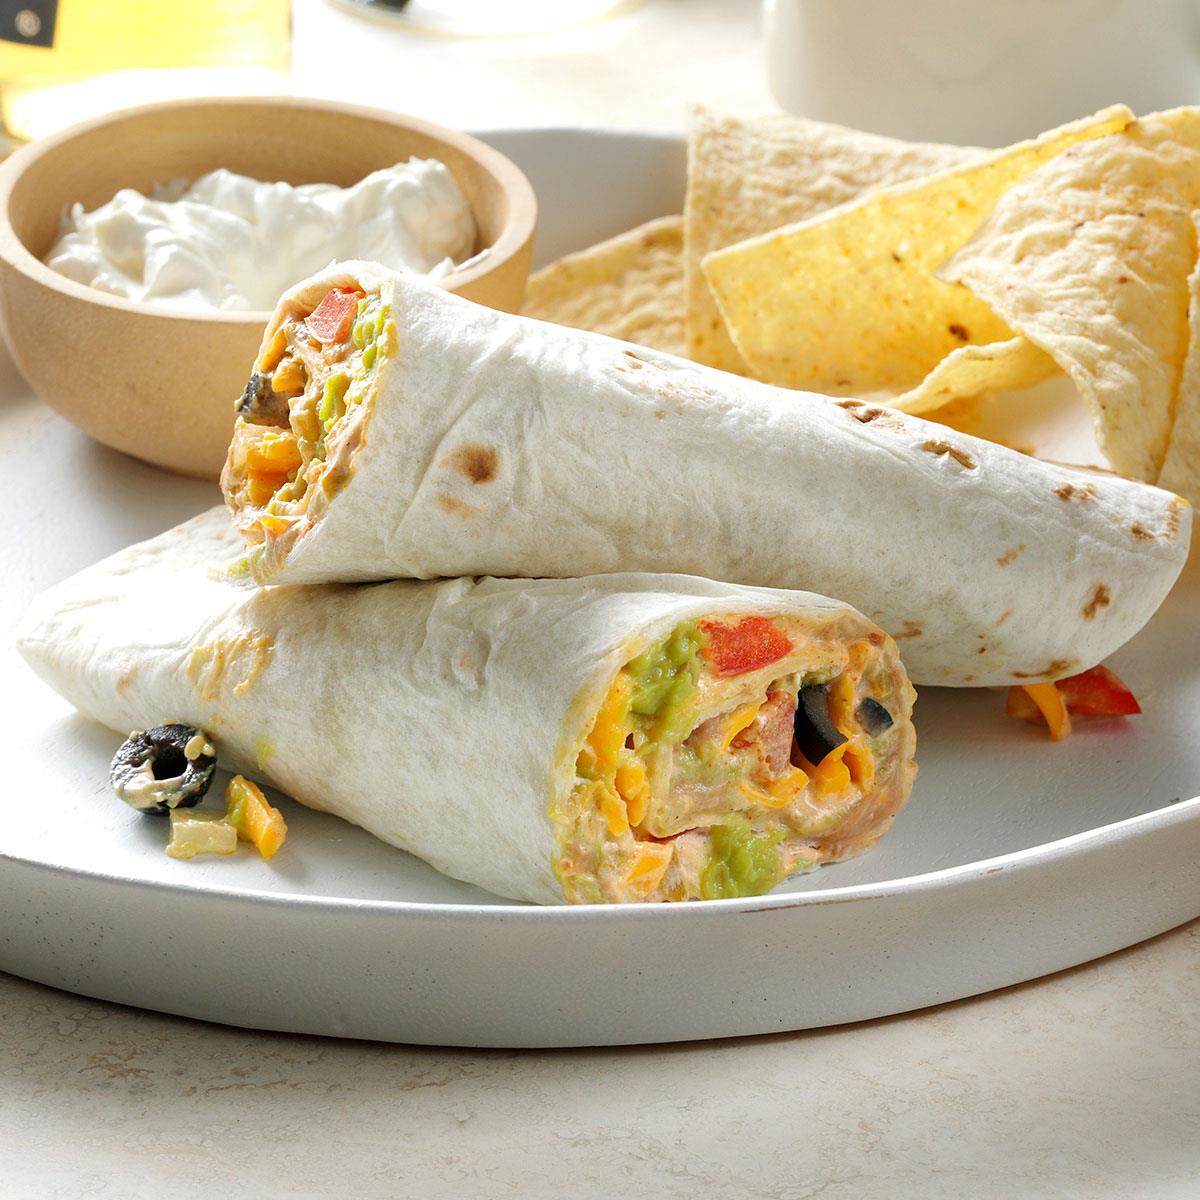 I was running late one night, so I shopped in my own fridge and came up with ingredients that became taco wraps. Everybody at the table was a happy camper. —Katie Mitschelen, La Porte, Indiana <a href="https://www.tasteofhome.com/recipes/quick-taco-wraps/">Get Recipe</a>